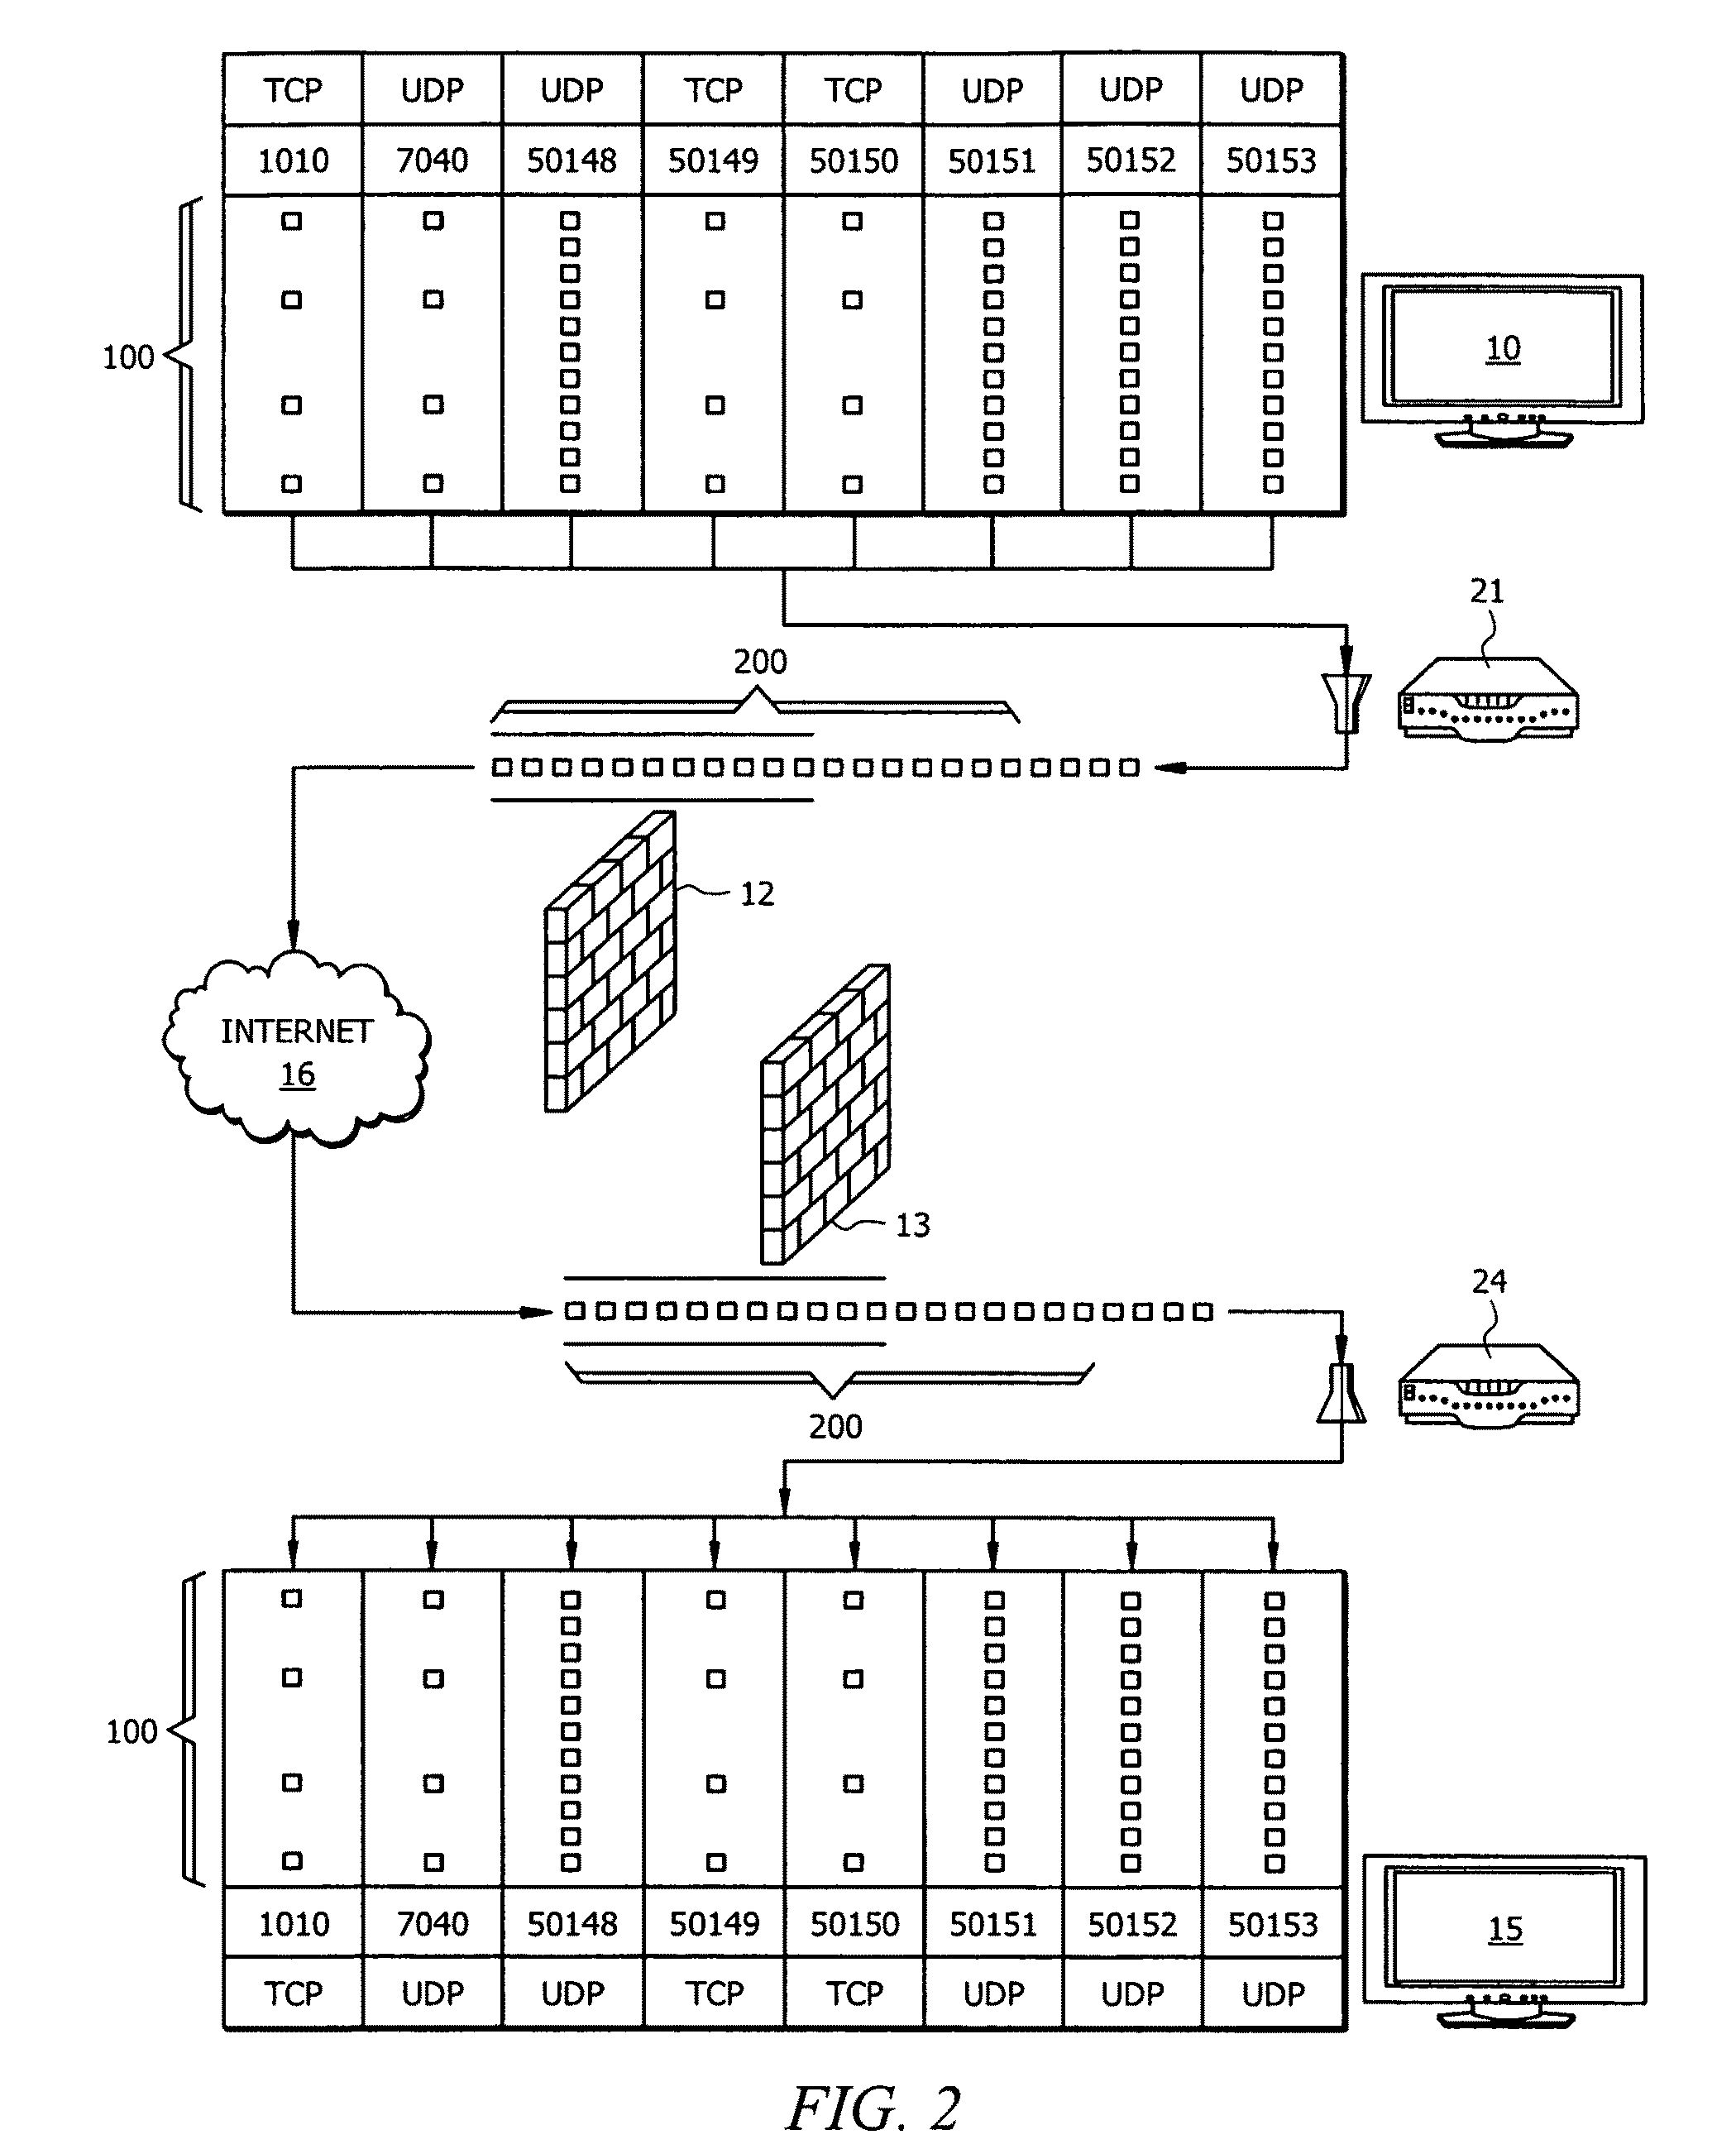 System and method for multimedia communication across disparate networks